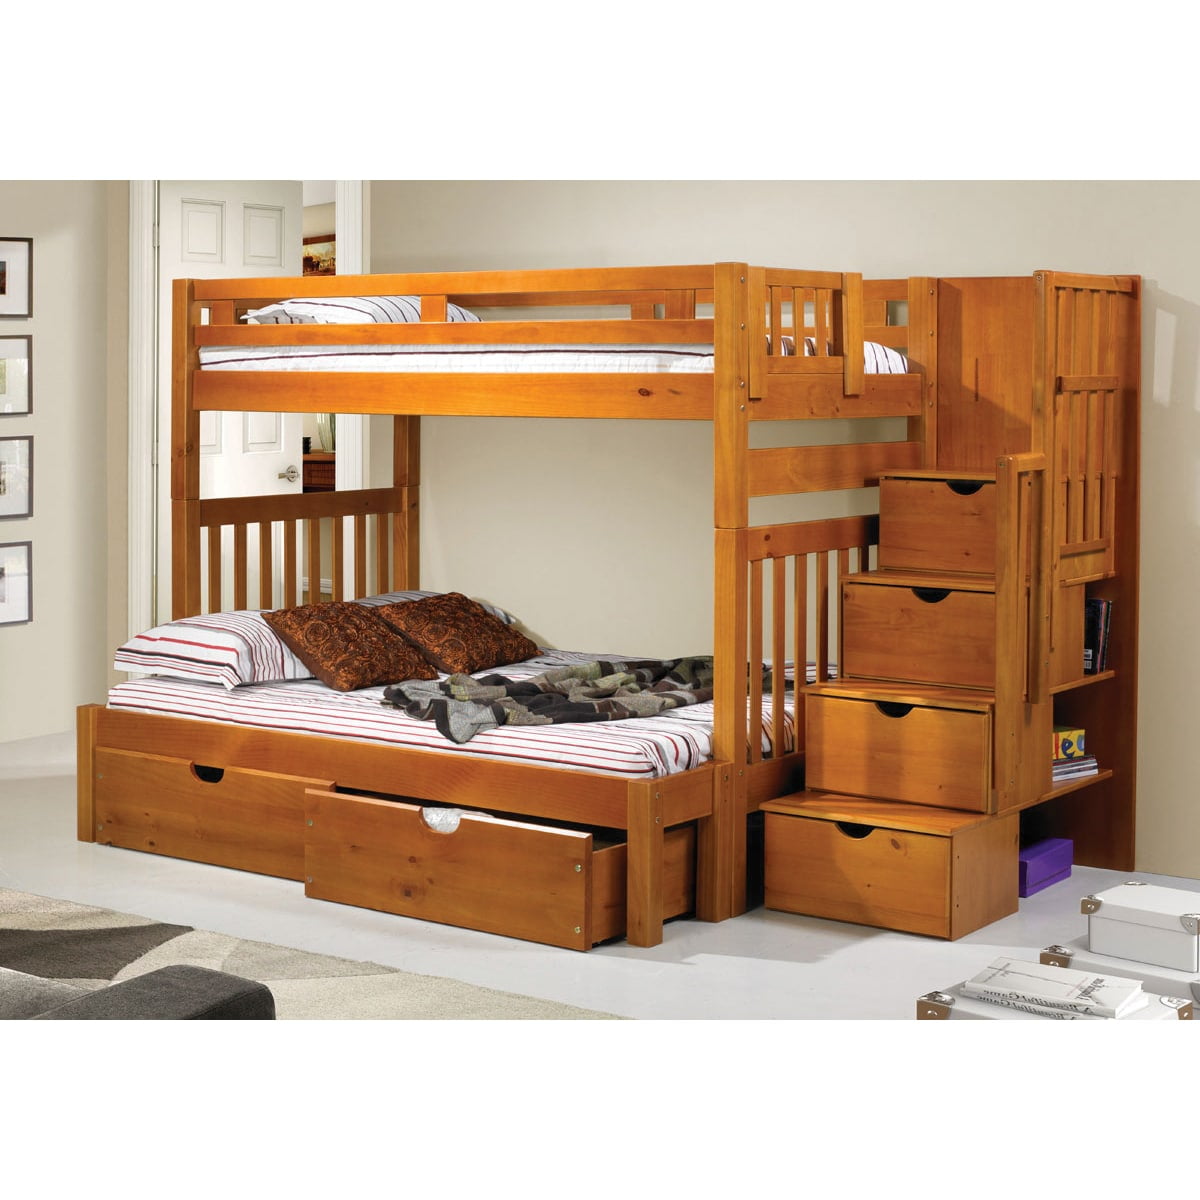 Tall Twin Over Futon Mission Stairway, Keystone Stairway Bunk Bed Reviews